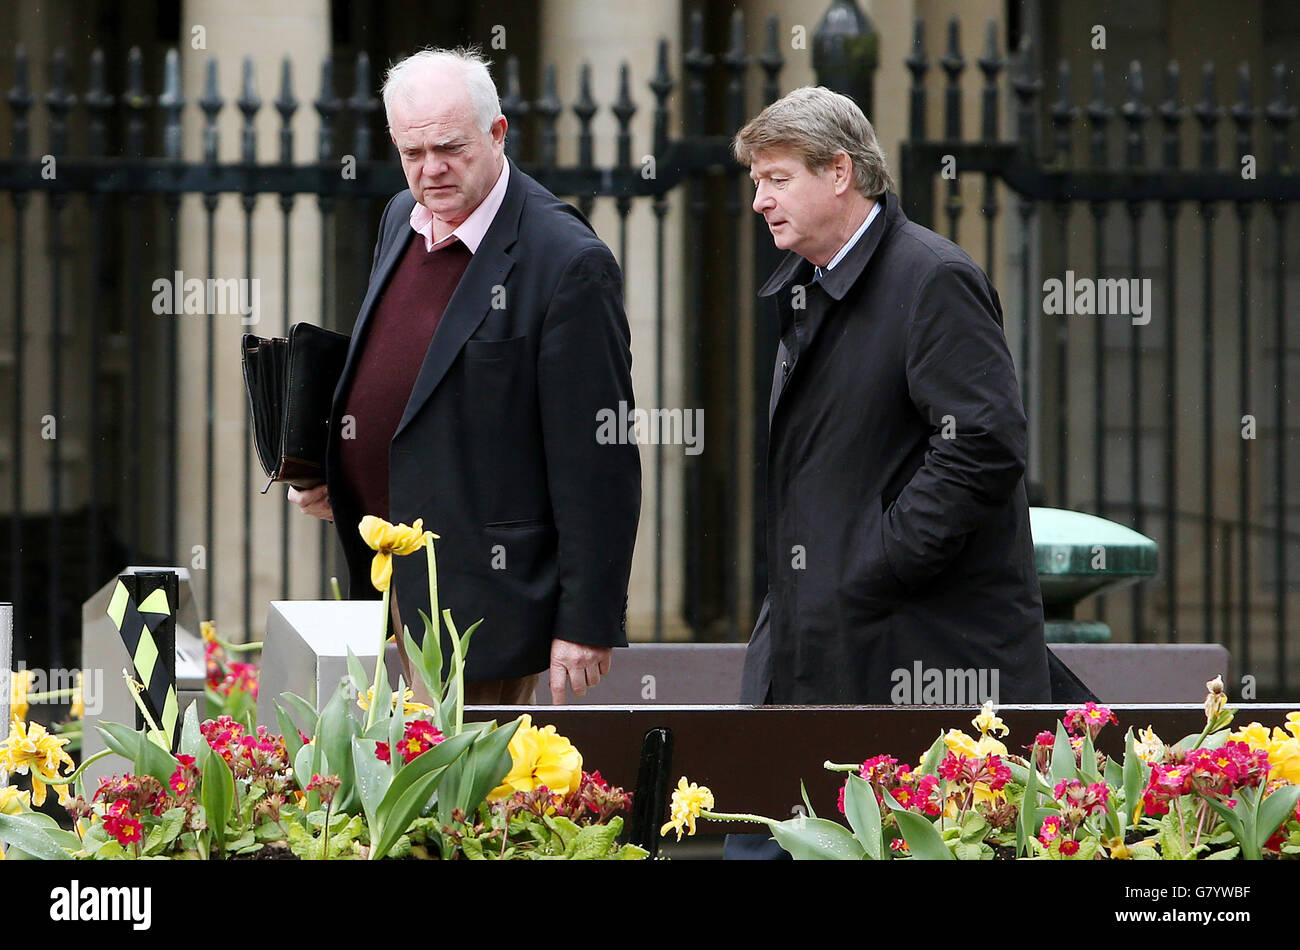 Solicitor-turned-property developer Brian O'Donnell (right) and Jerry Beades arrive at Leinster House, Dublin for a meeting. Stock Photo